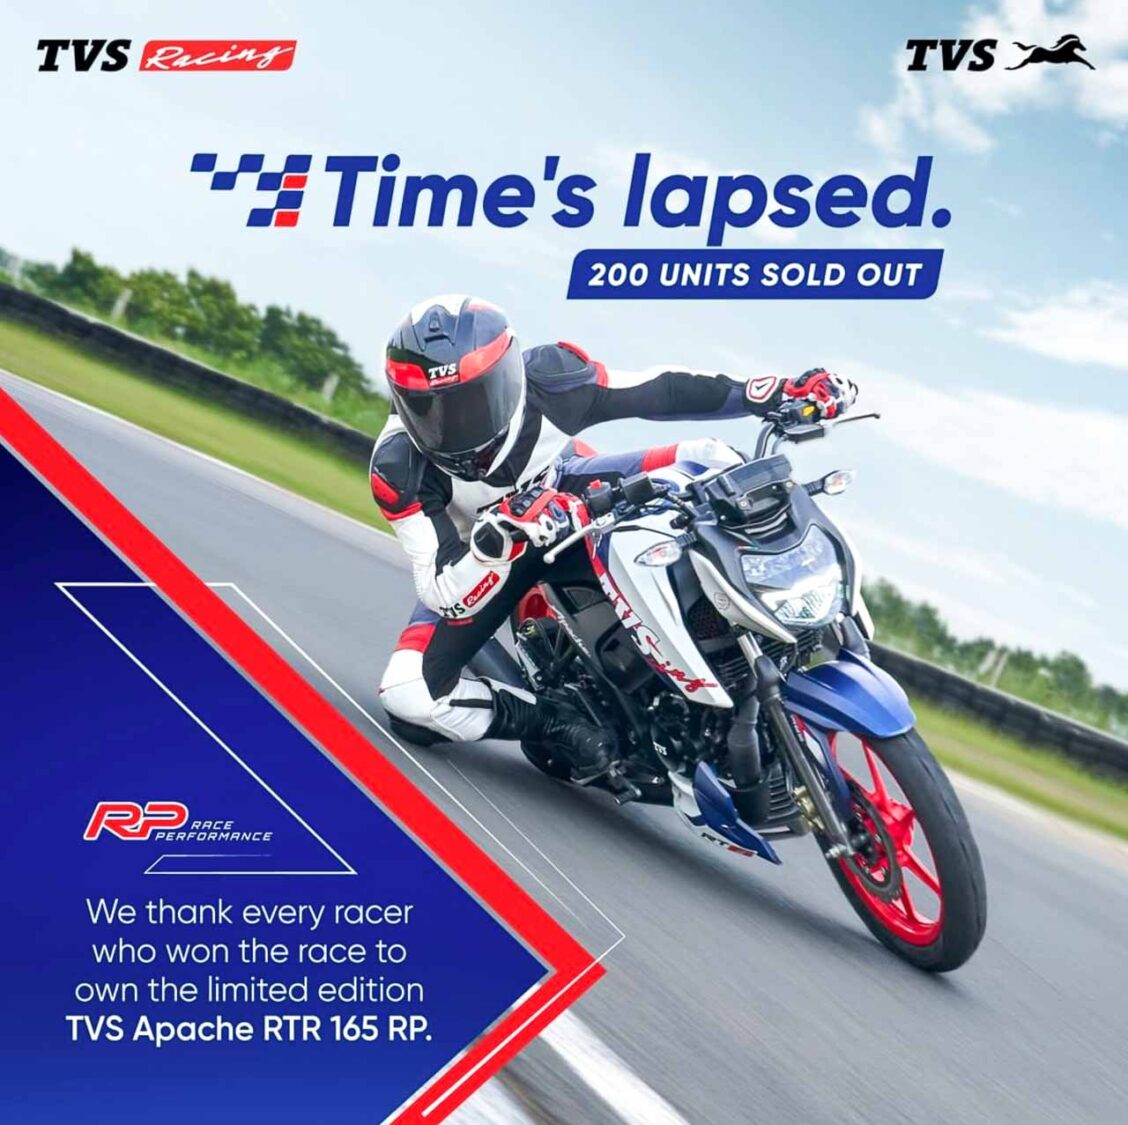 Tvs Apache 165 Sold Out Even Before First Owner Takes Delivery